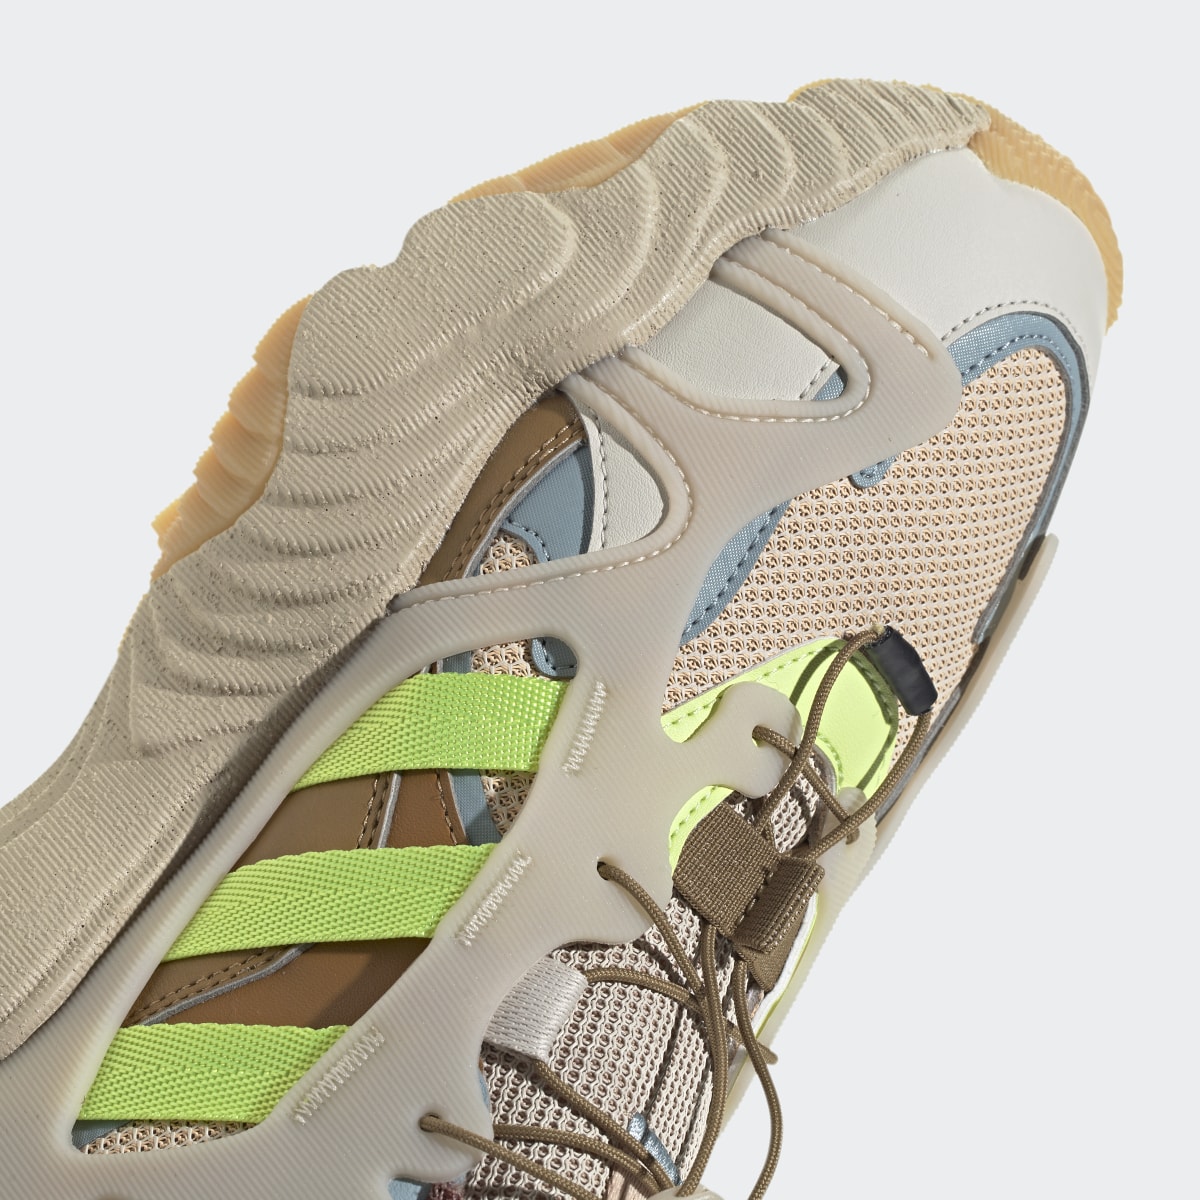 Adidas Roverend Adventure Shoes. 10